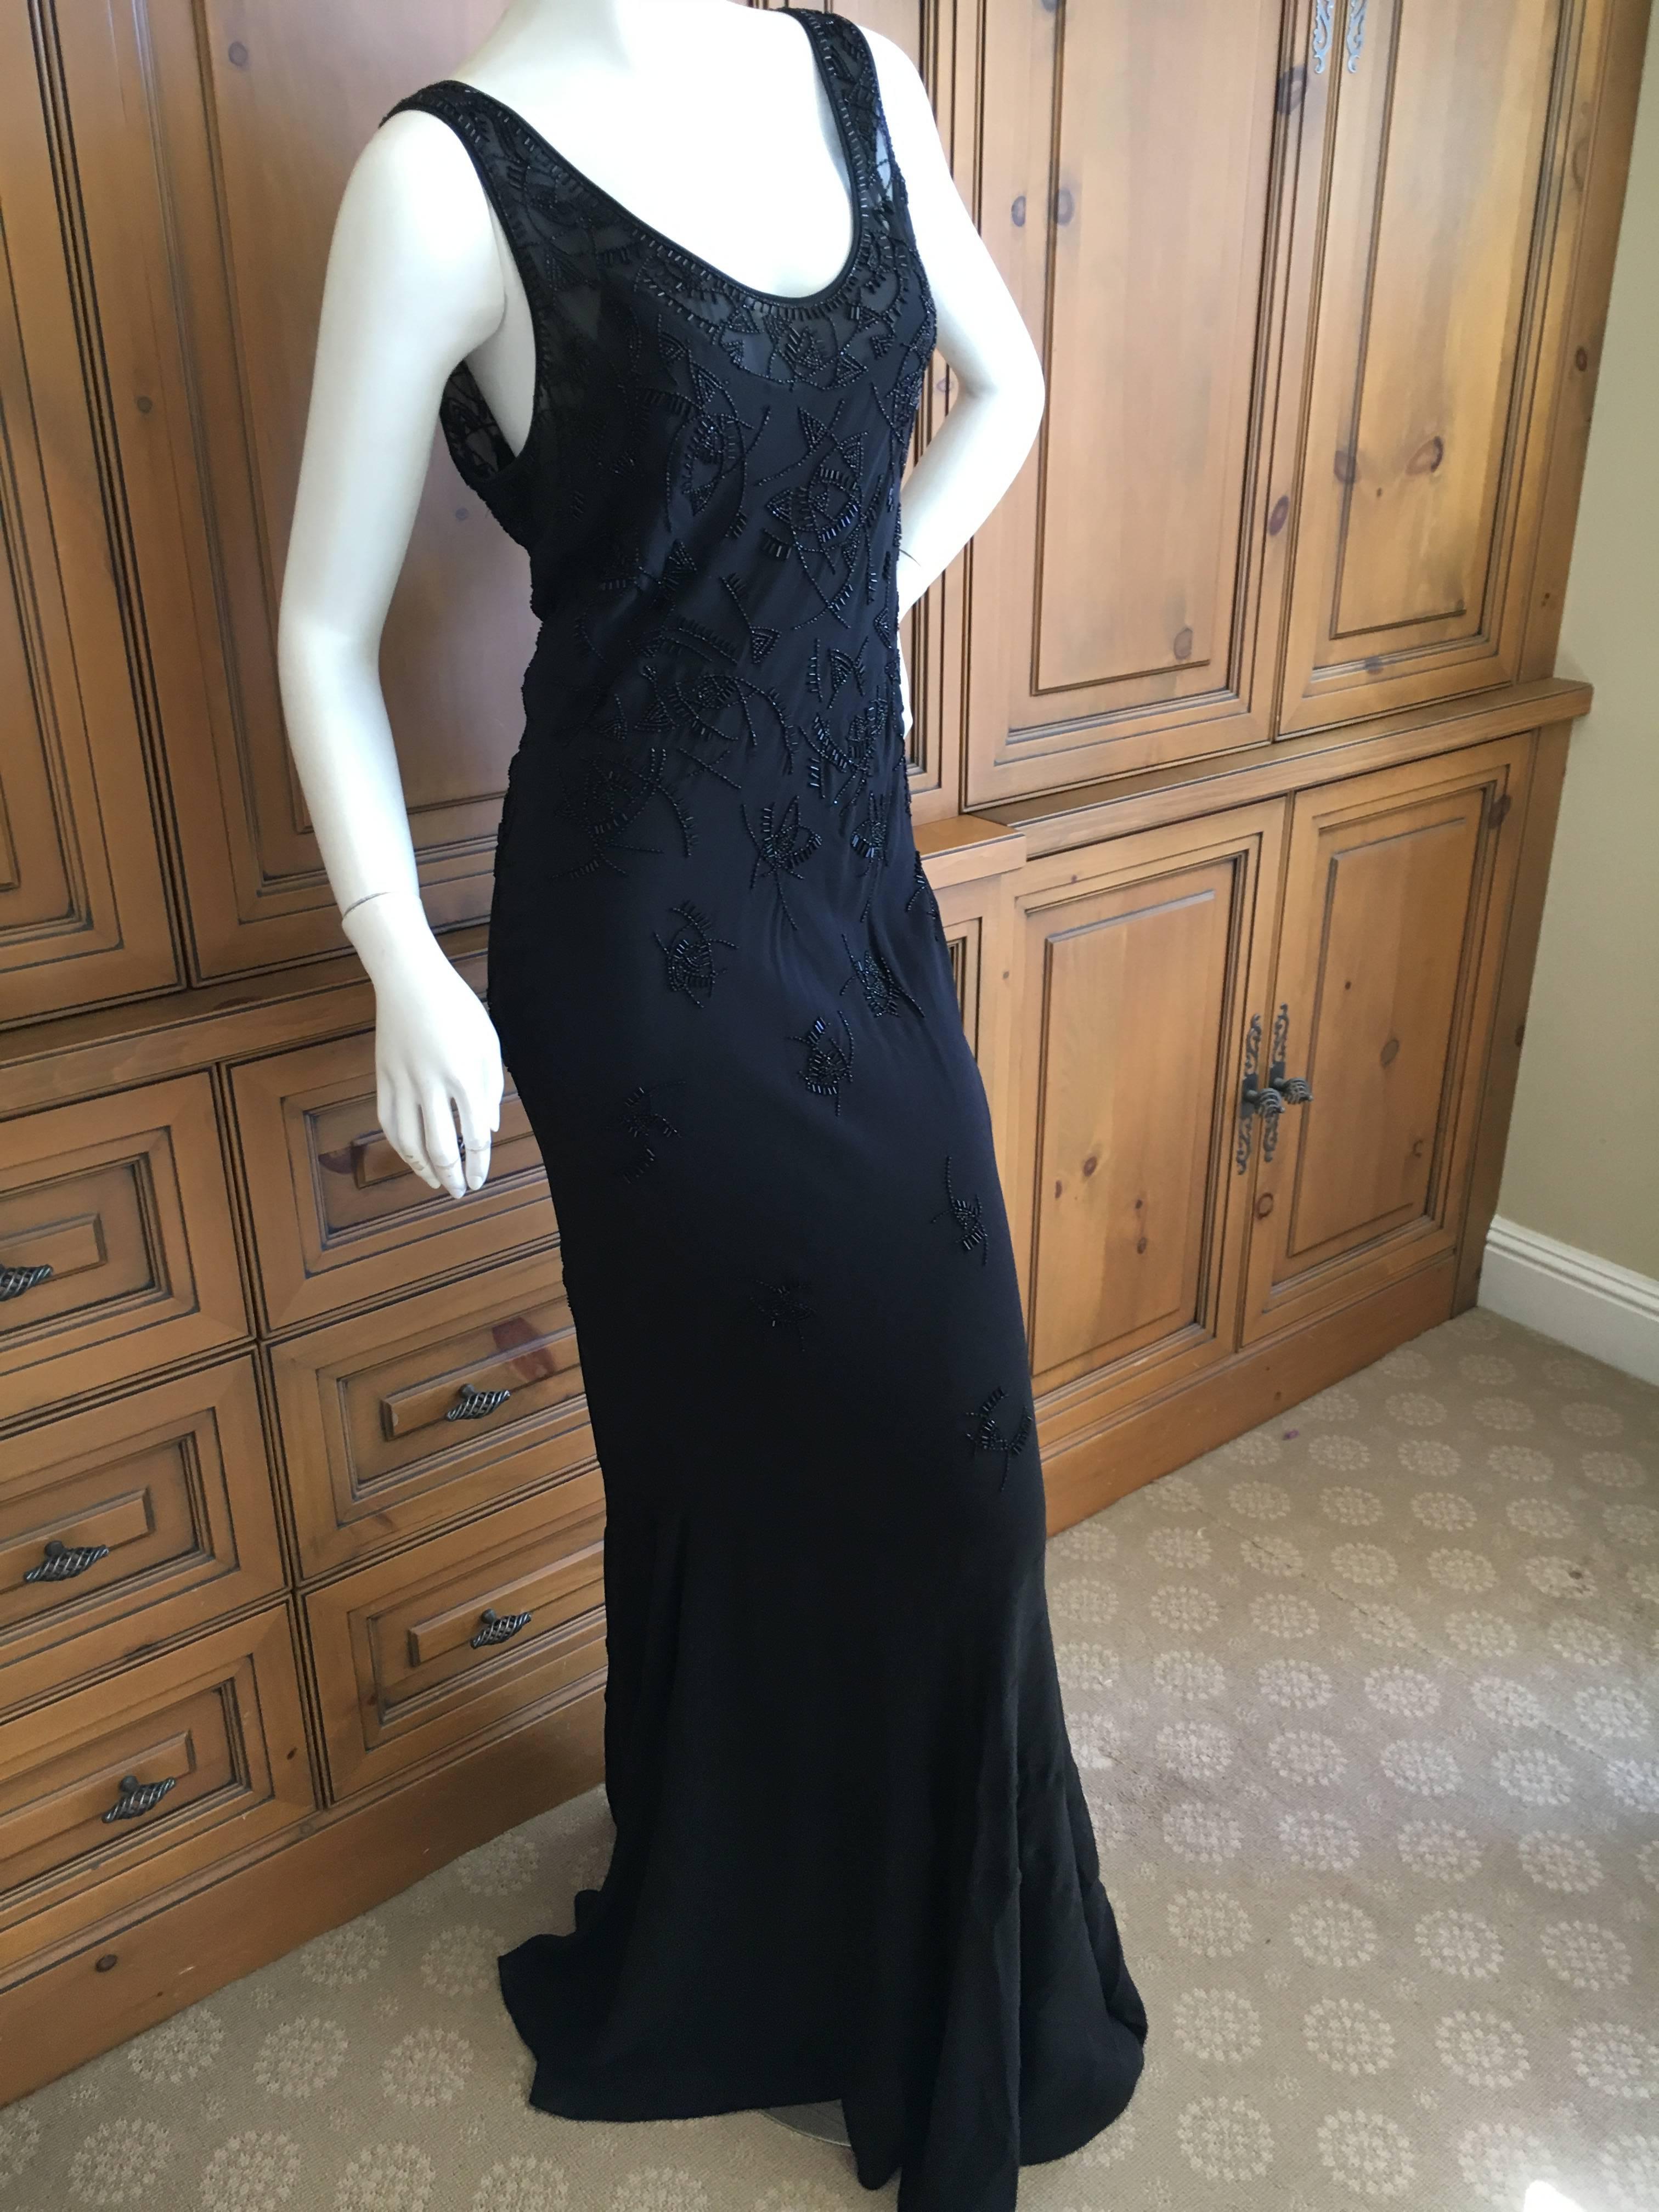 Christian Dior by John Galliano Bead Embellished Black Evening Dress For Sale 4